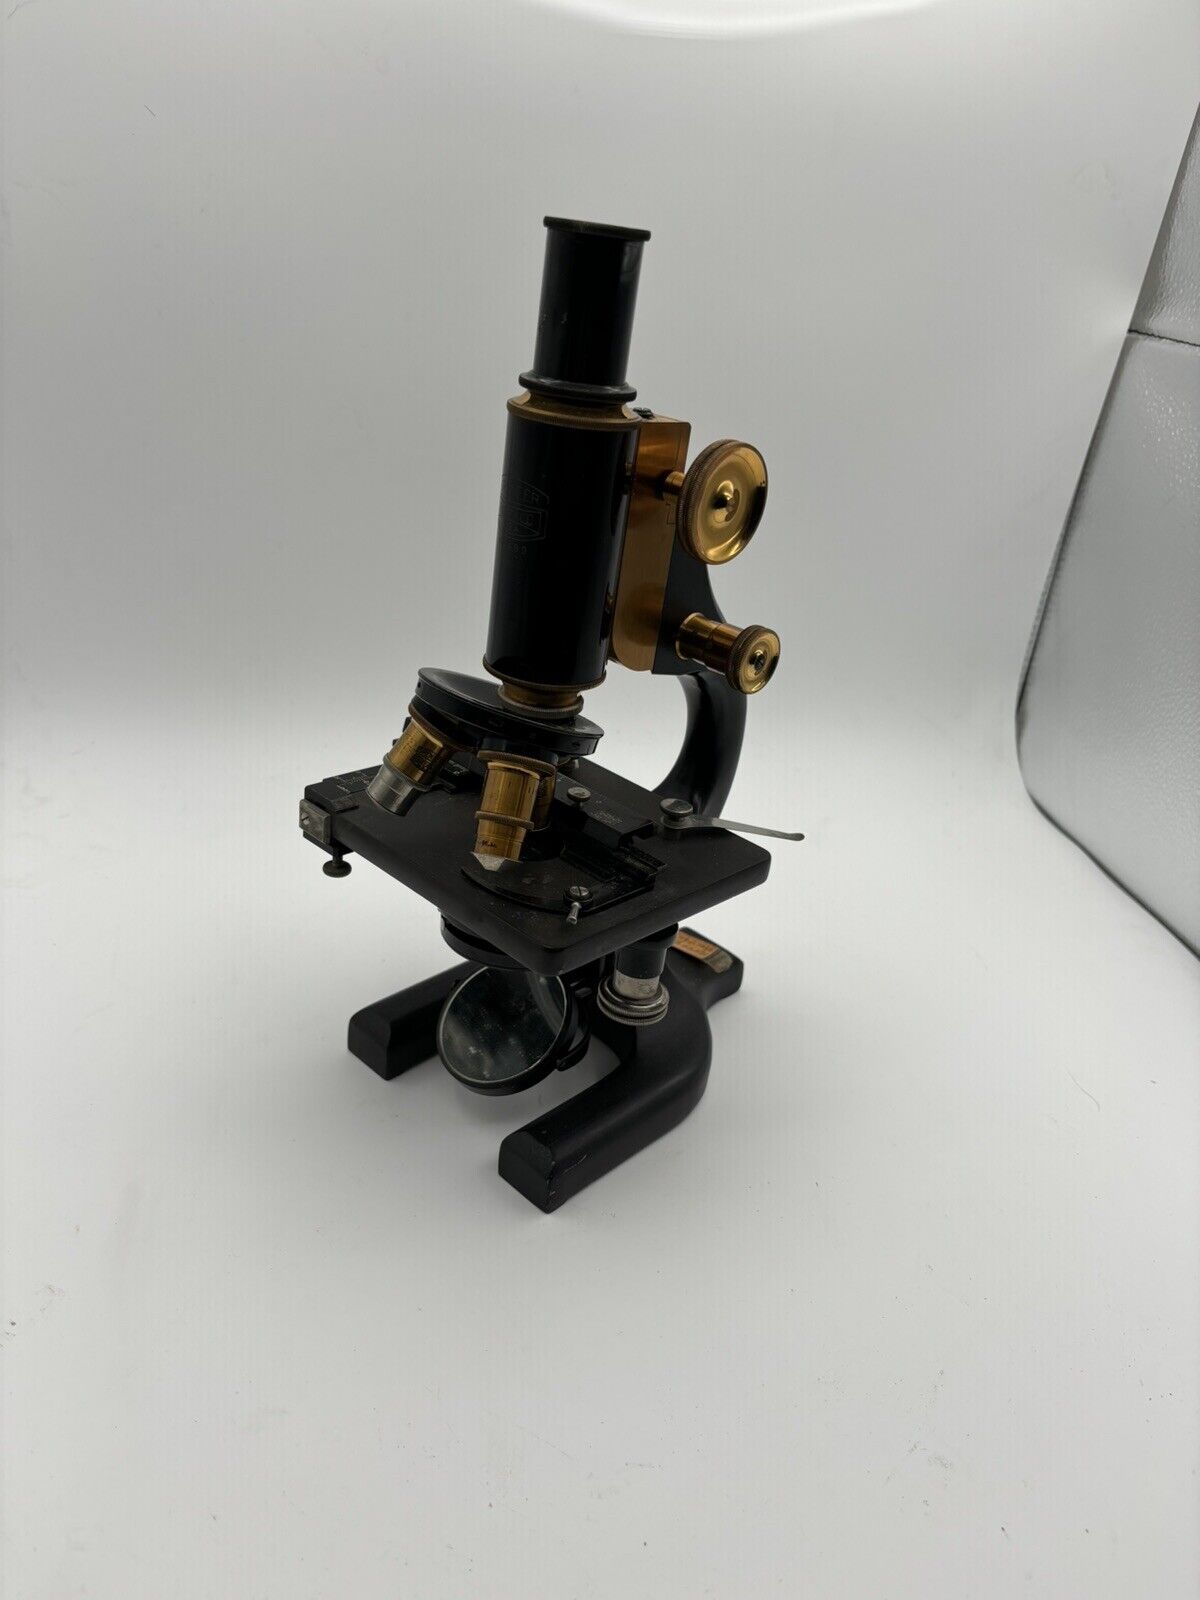 Vintage Spencer Buffalo Microscope In Wooden Case. Museum Quality Piece.